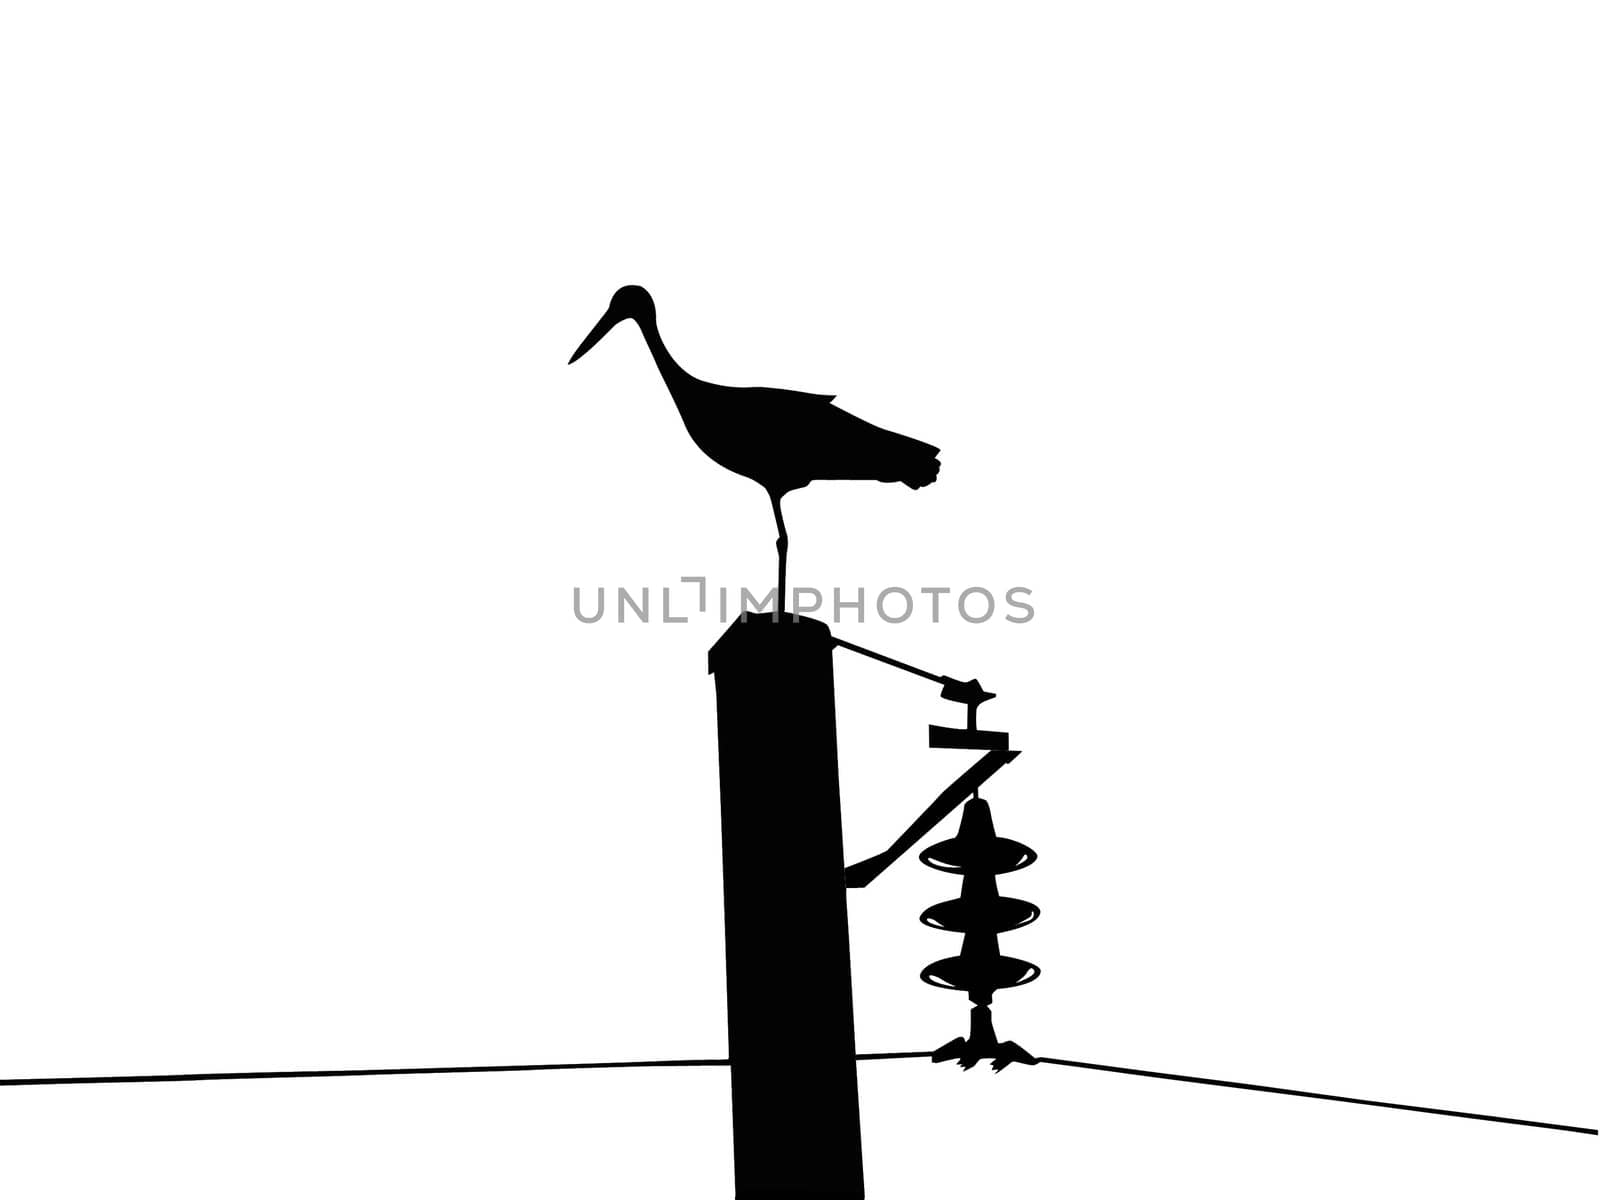 vector silhouette of the crane isolated on white background by basel101658